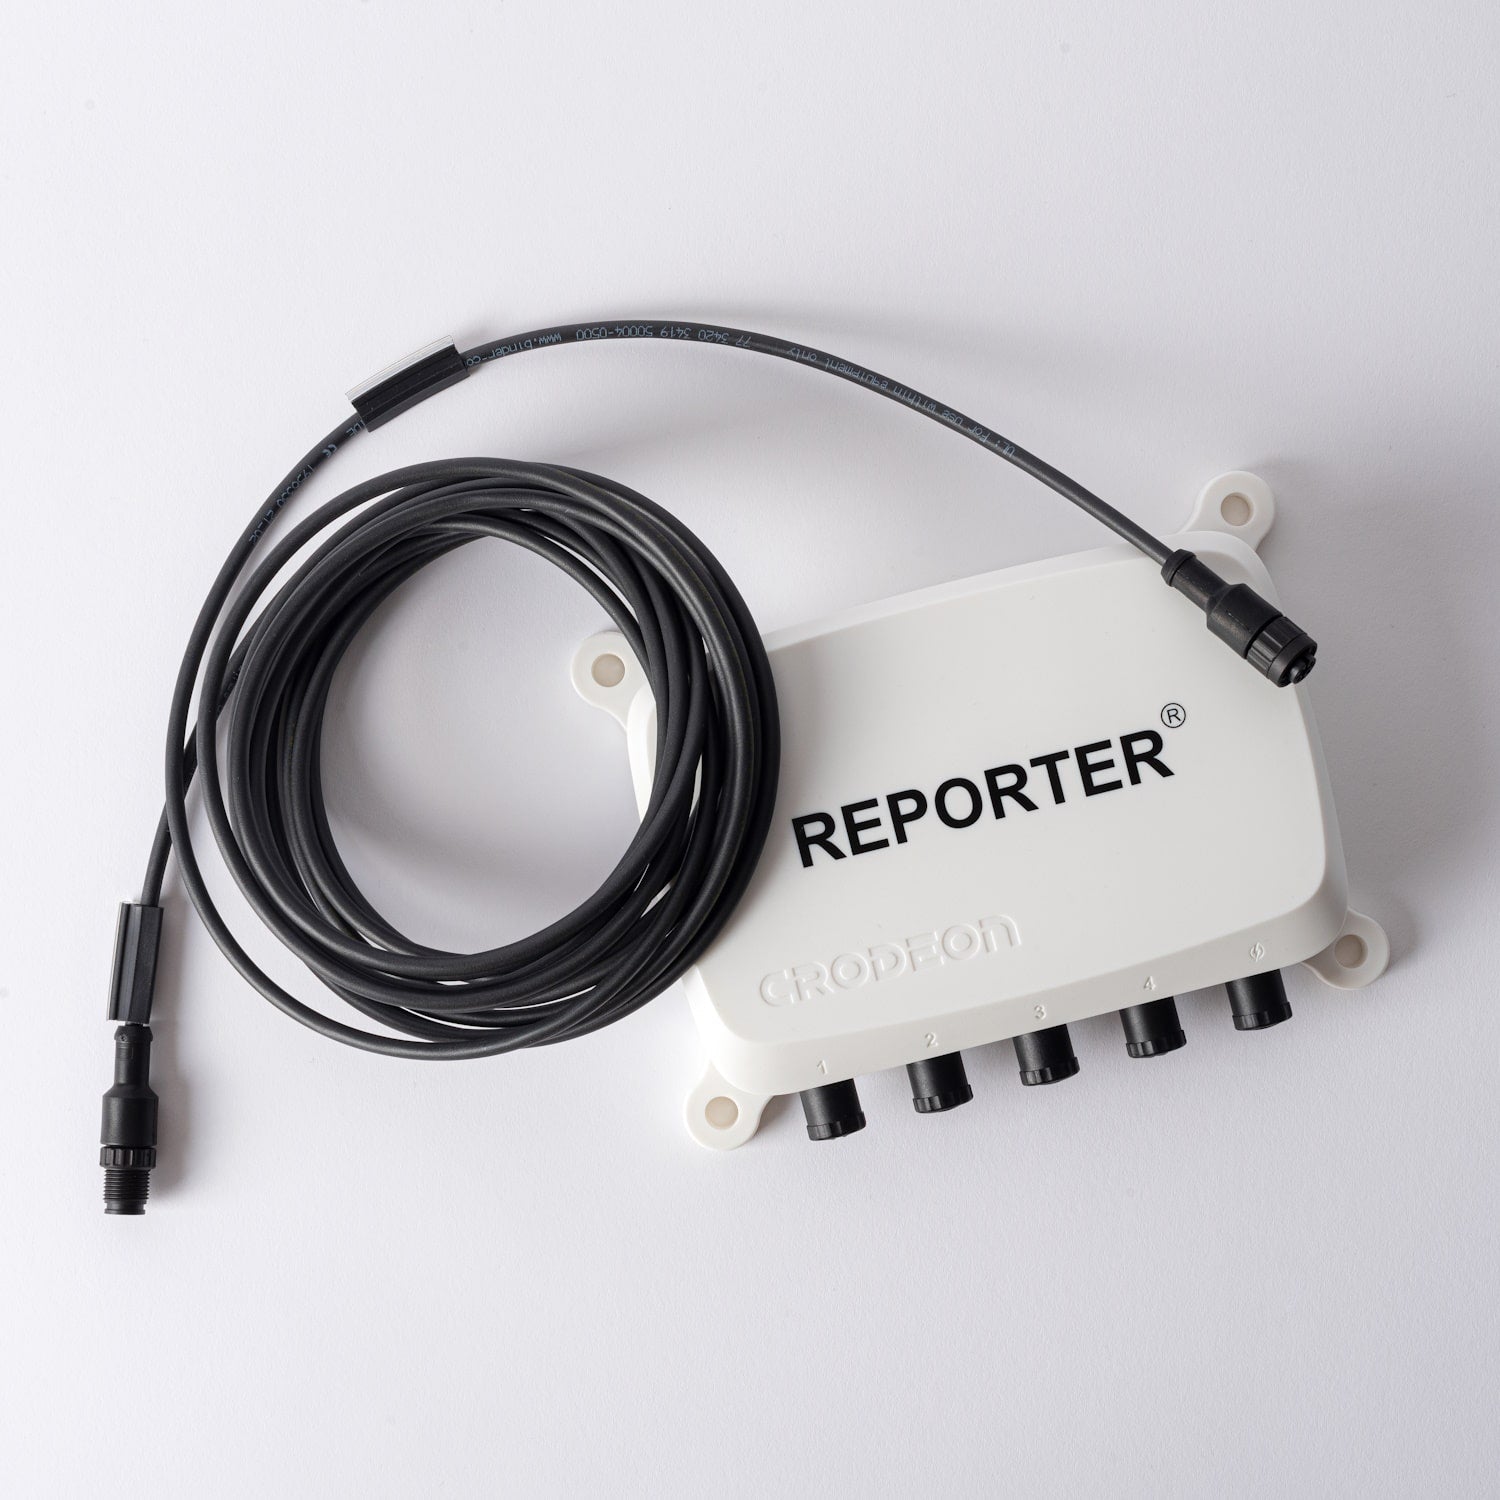 sensor extension cord with Reporter